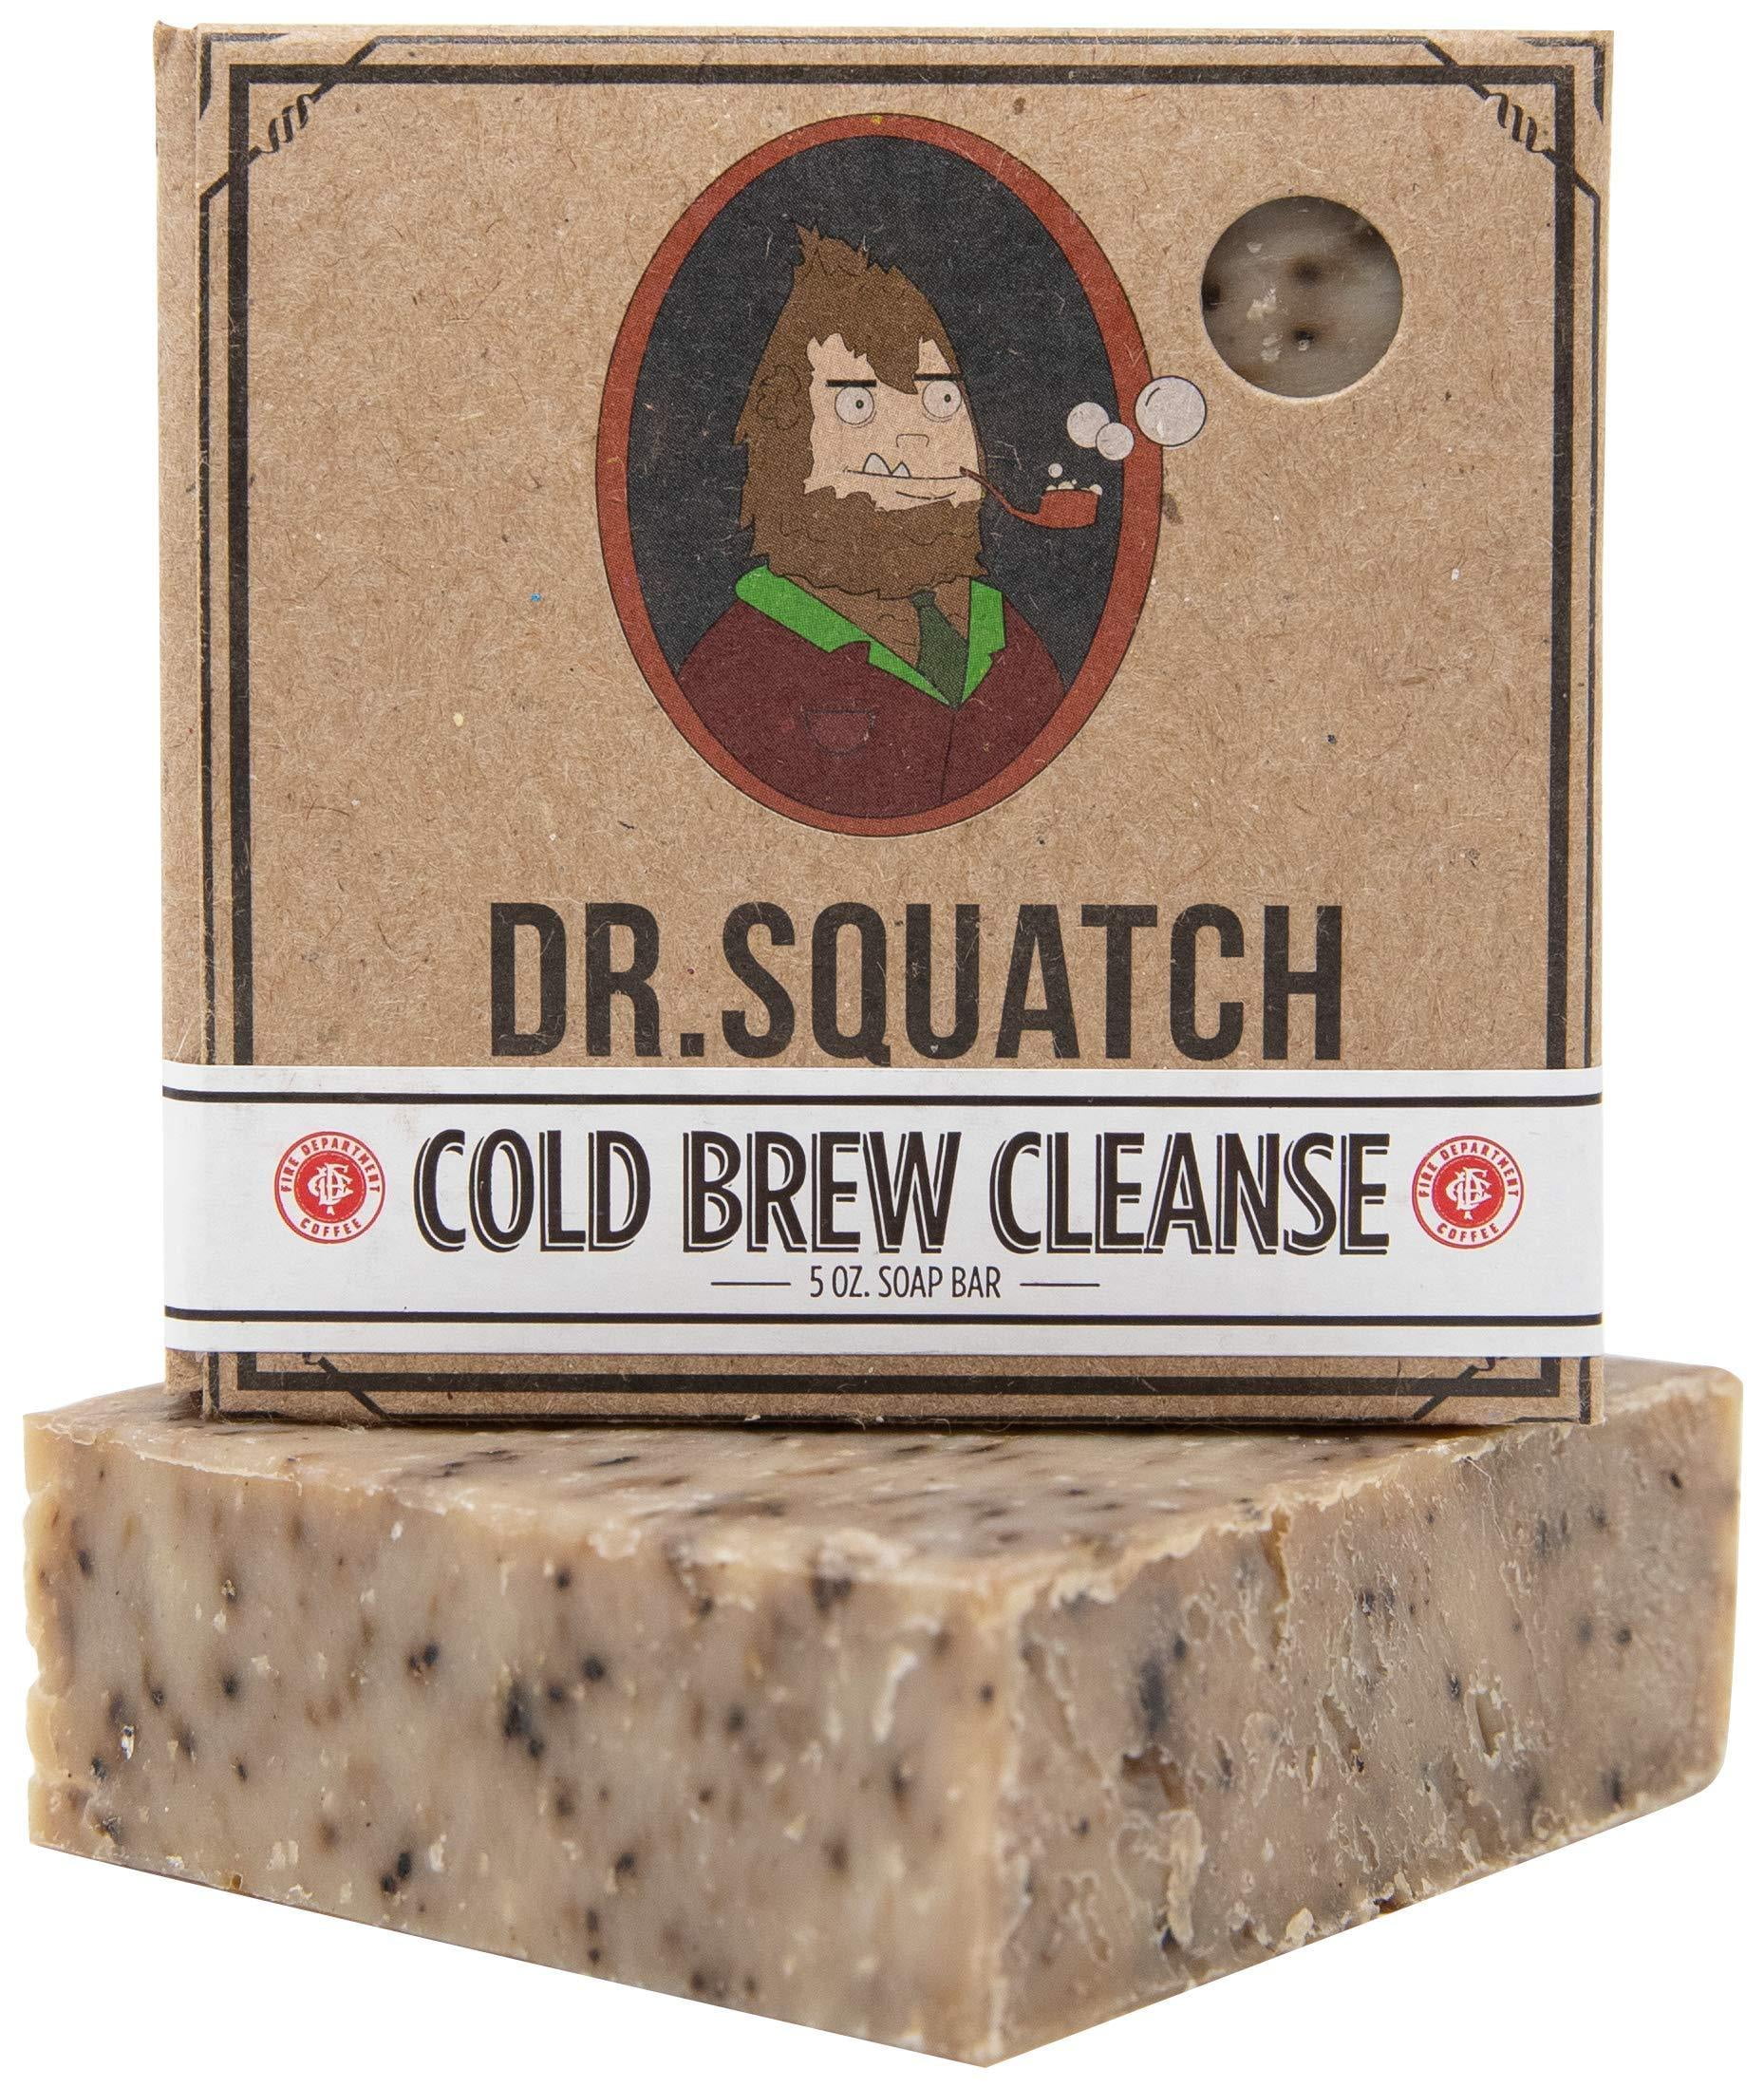 Cold Brew Cleanse Coffee Soap Bar #6 Cool Cleanse Brew 5 Ounce (Pack of 1)